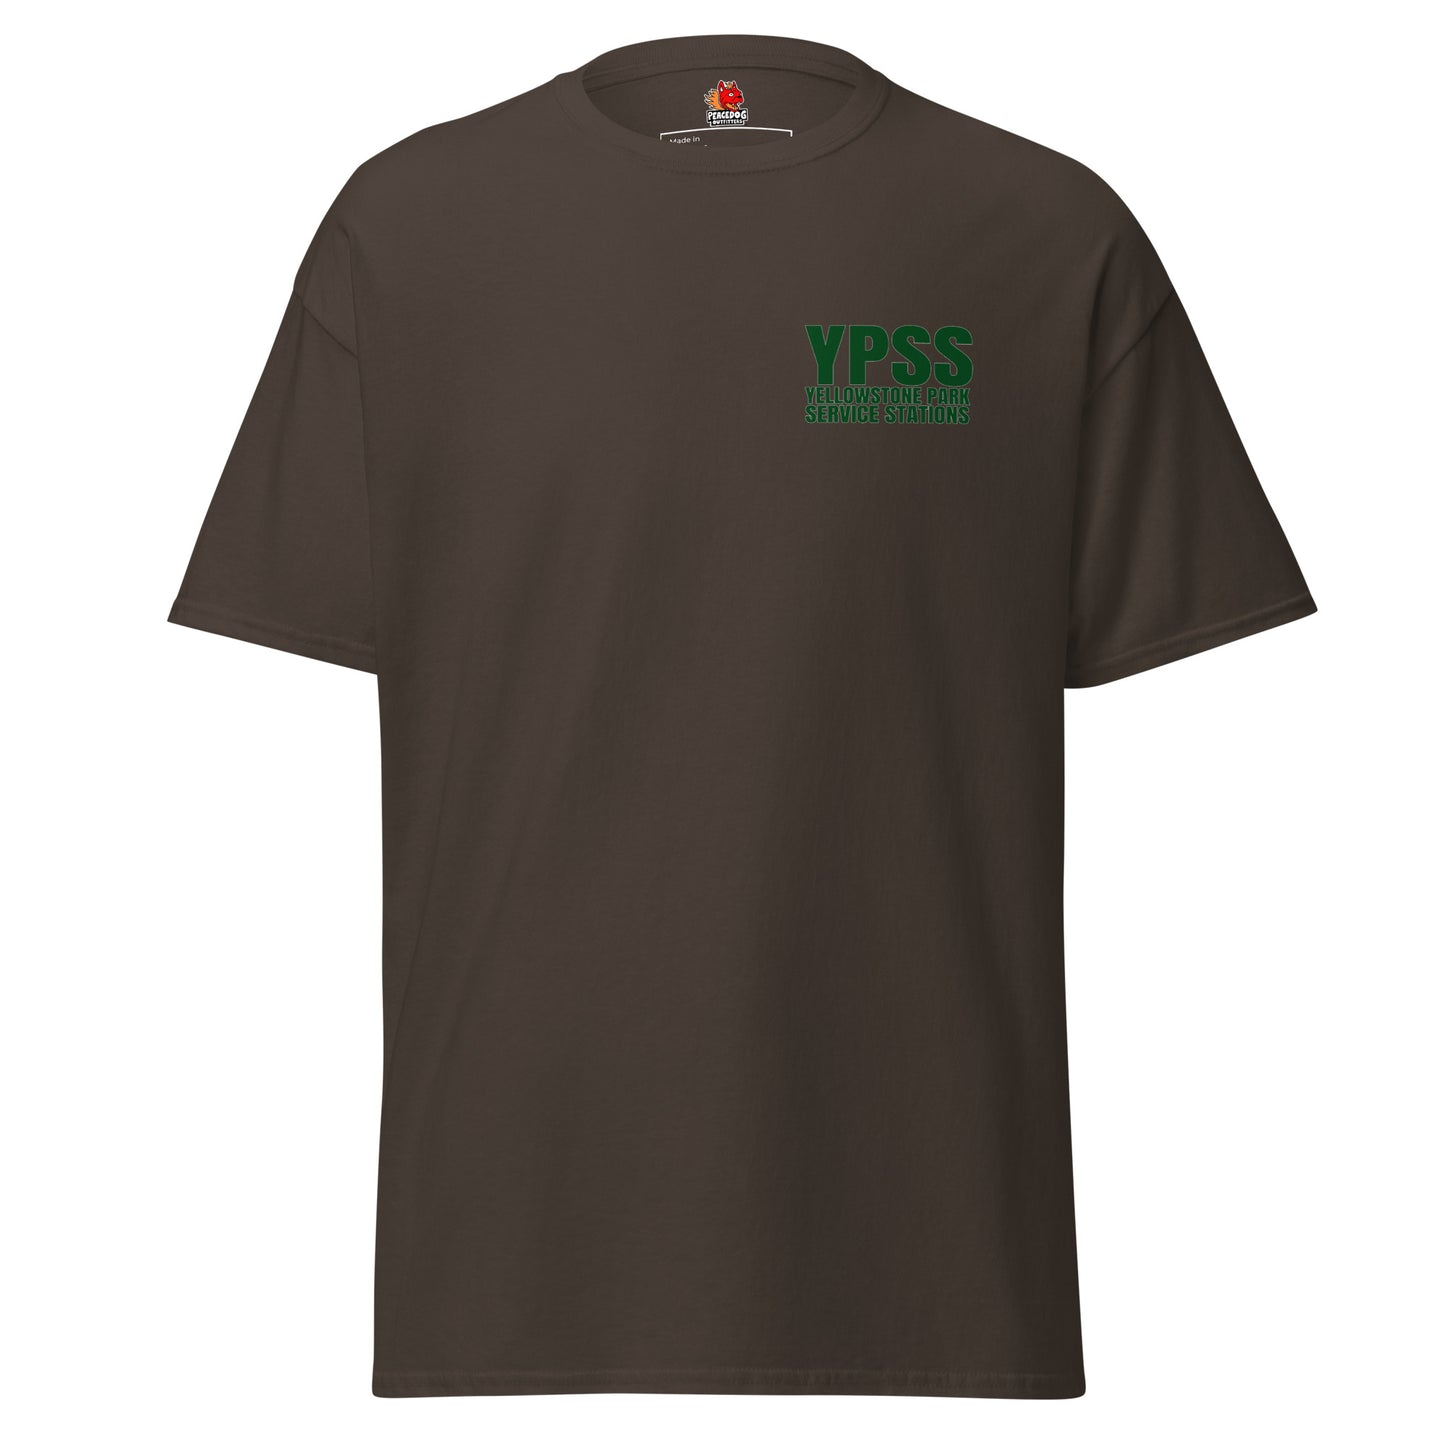 YPSS Yellowstone Park Service Stations - Canyon Station - Classic Tee